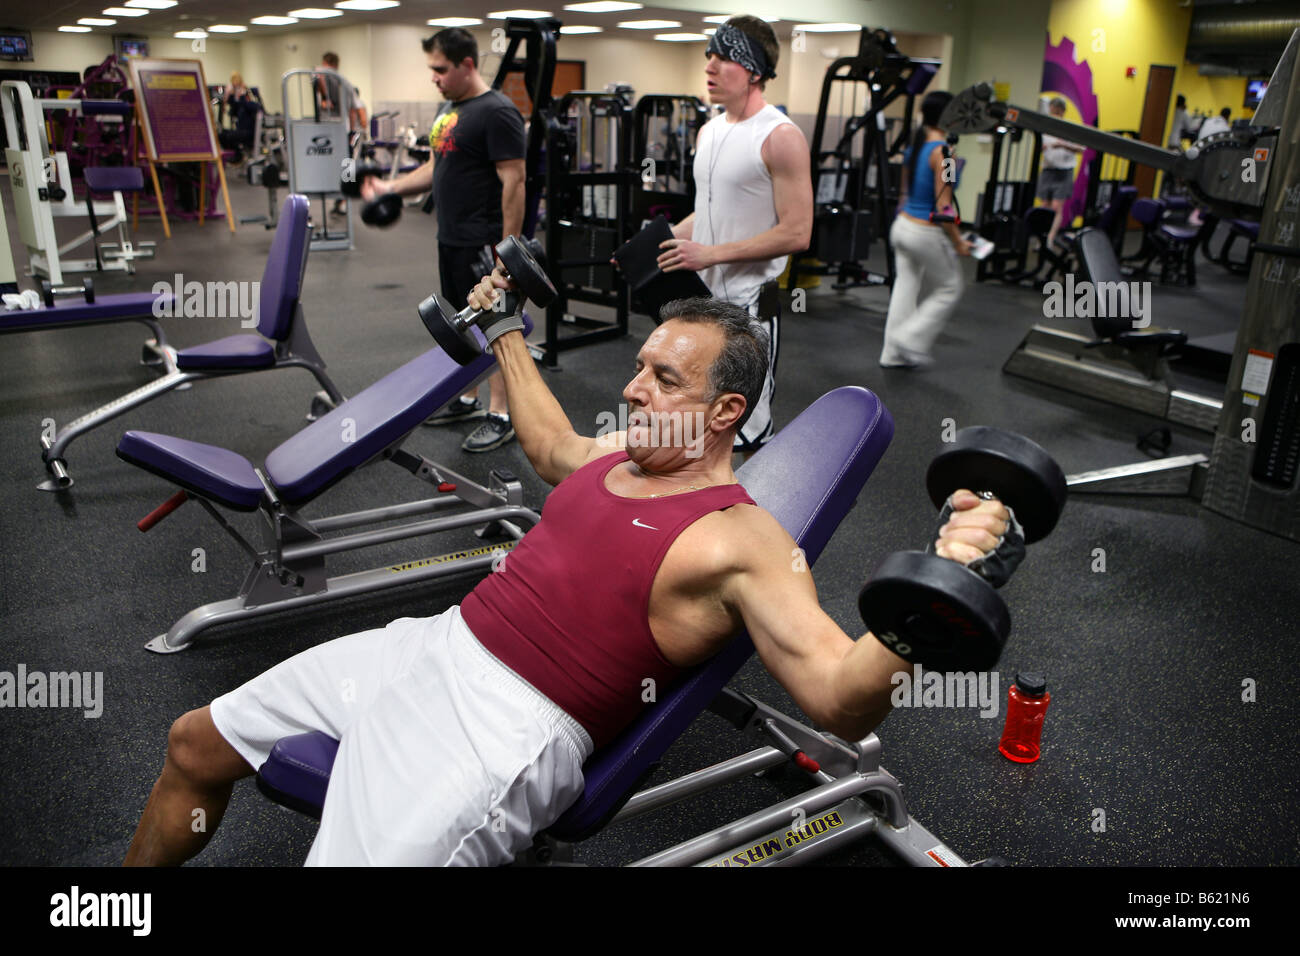 A 61-Year-old man works out in a gym. The man, who has a family history of Heart disease works out to improve his health. Stock Photo